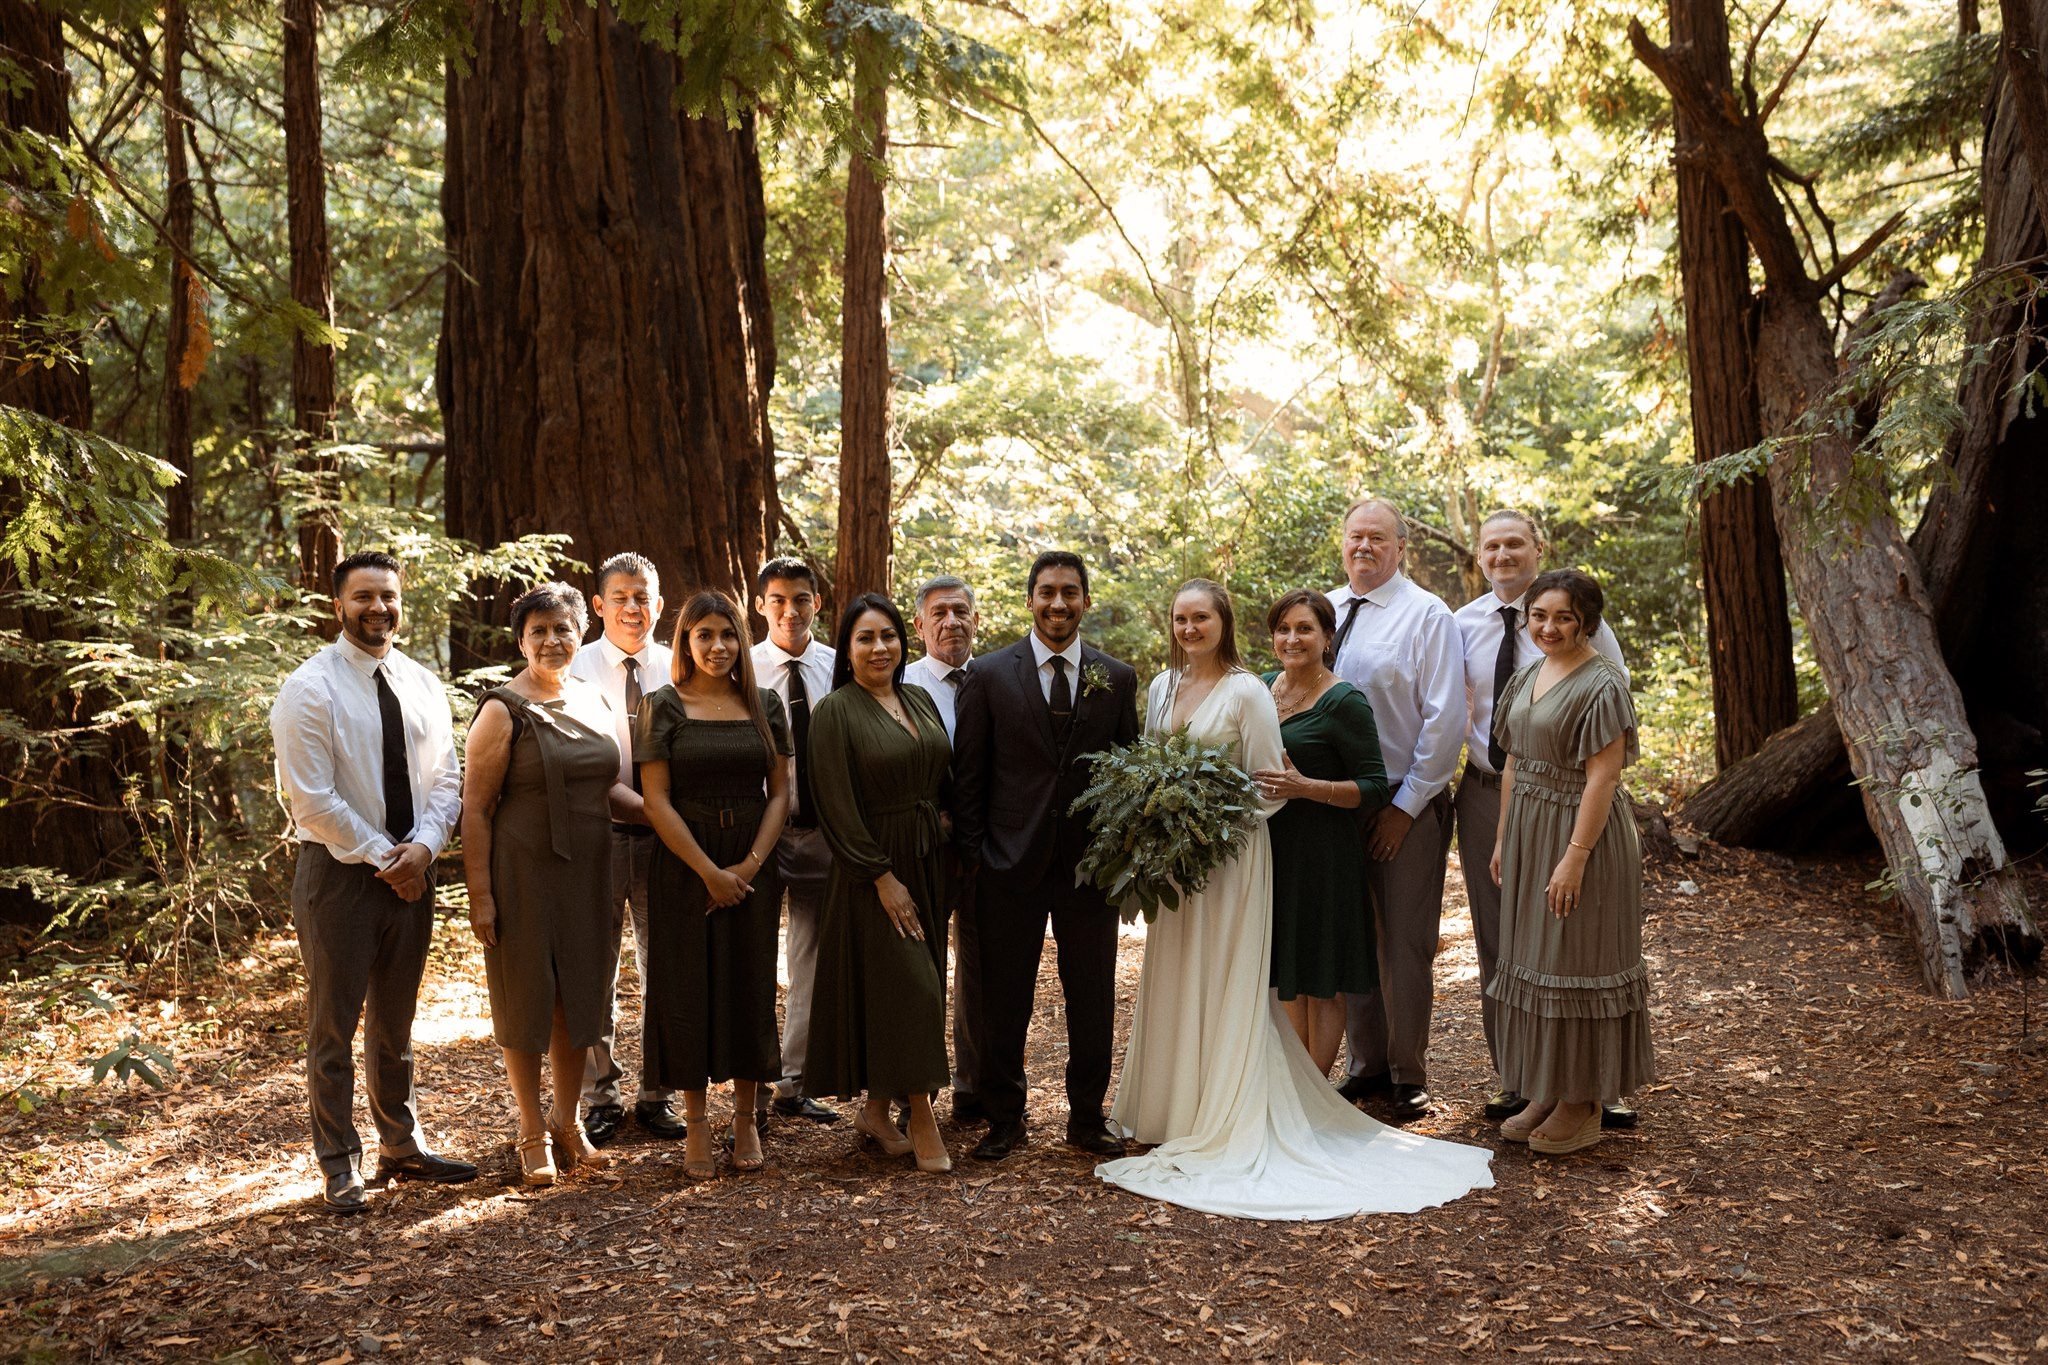 060_Two-Day Big Sur Redwoods Elopement with Family_Will Khoury Elopement Photographer.jpg